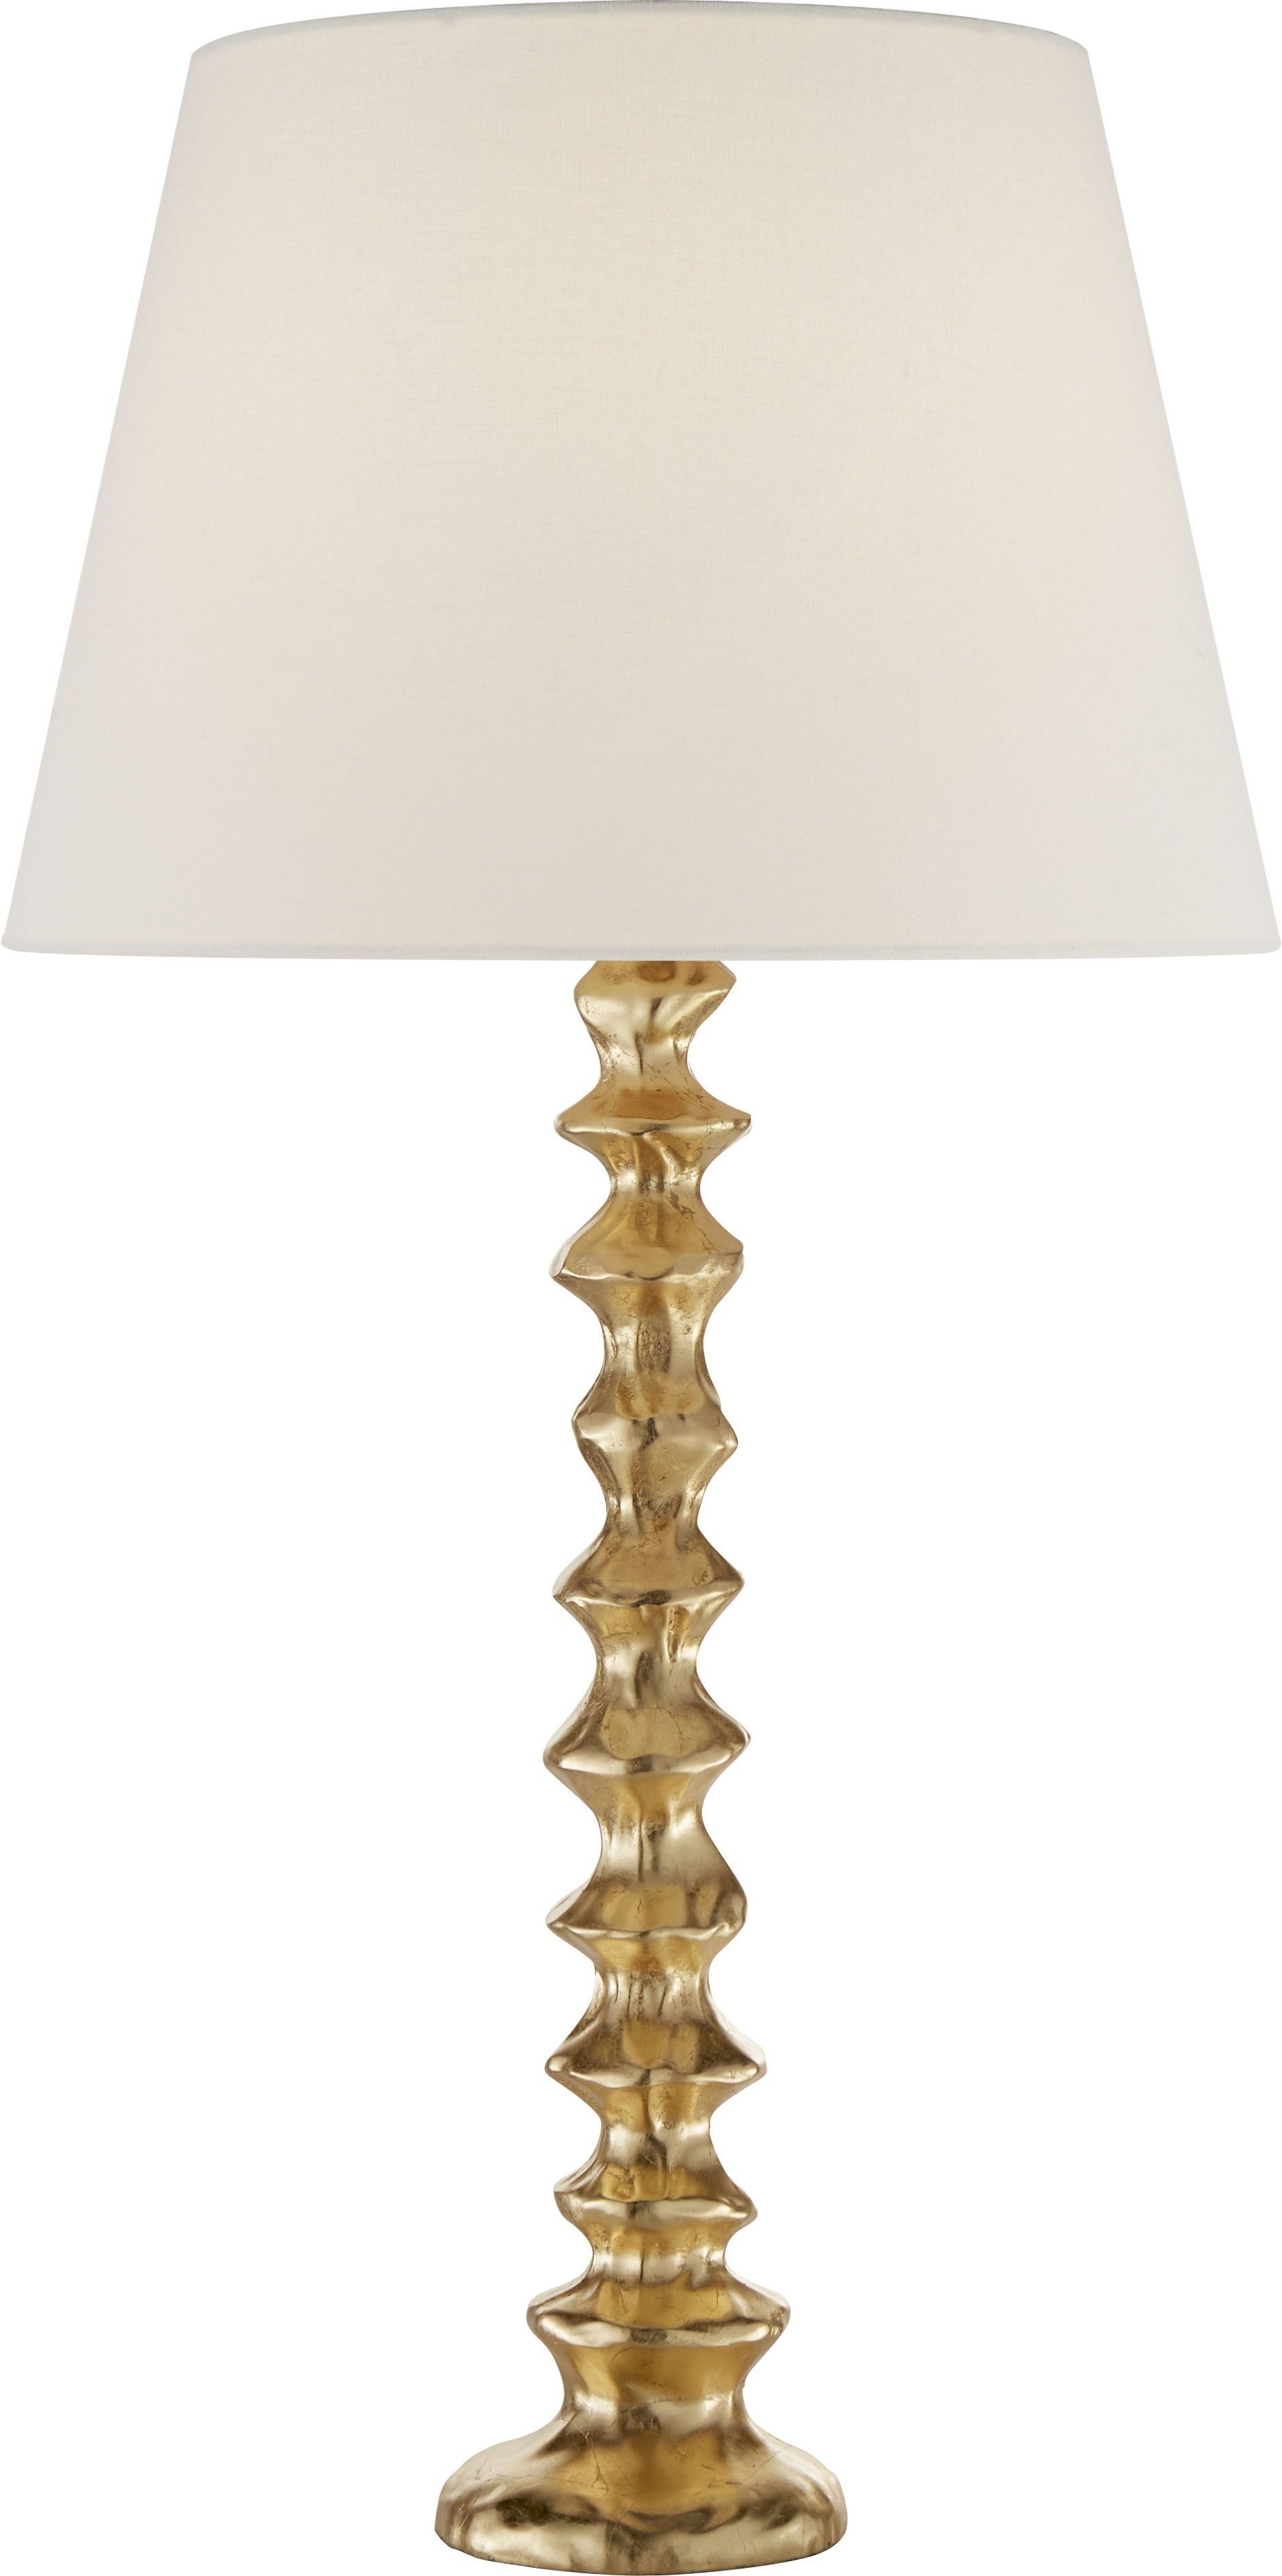 Laura Ashley Table Lamps For Living Room Within Fashionable Furniture : Living Room Lamp Design Ashley Furniture Table Lamps (View 7 of 20)